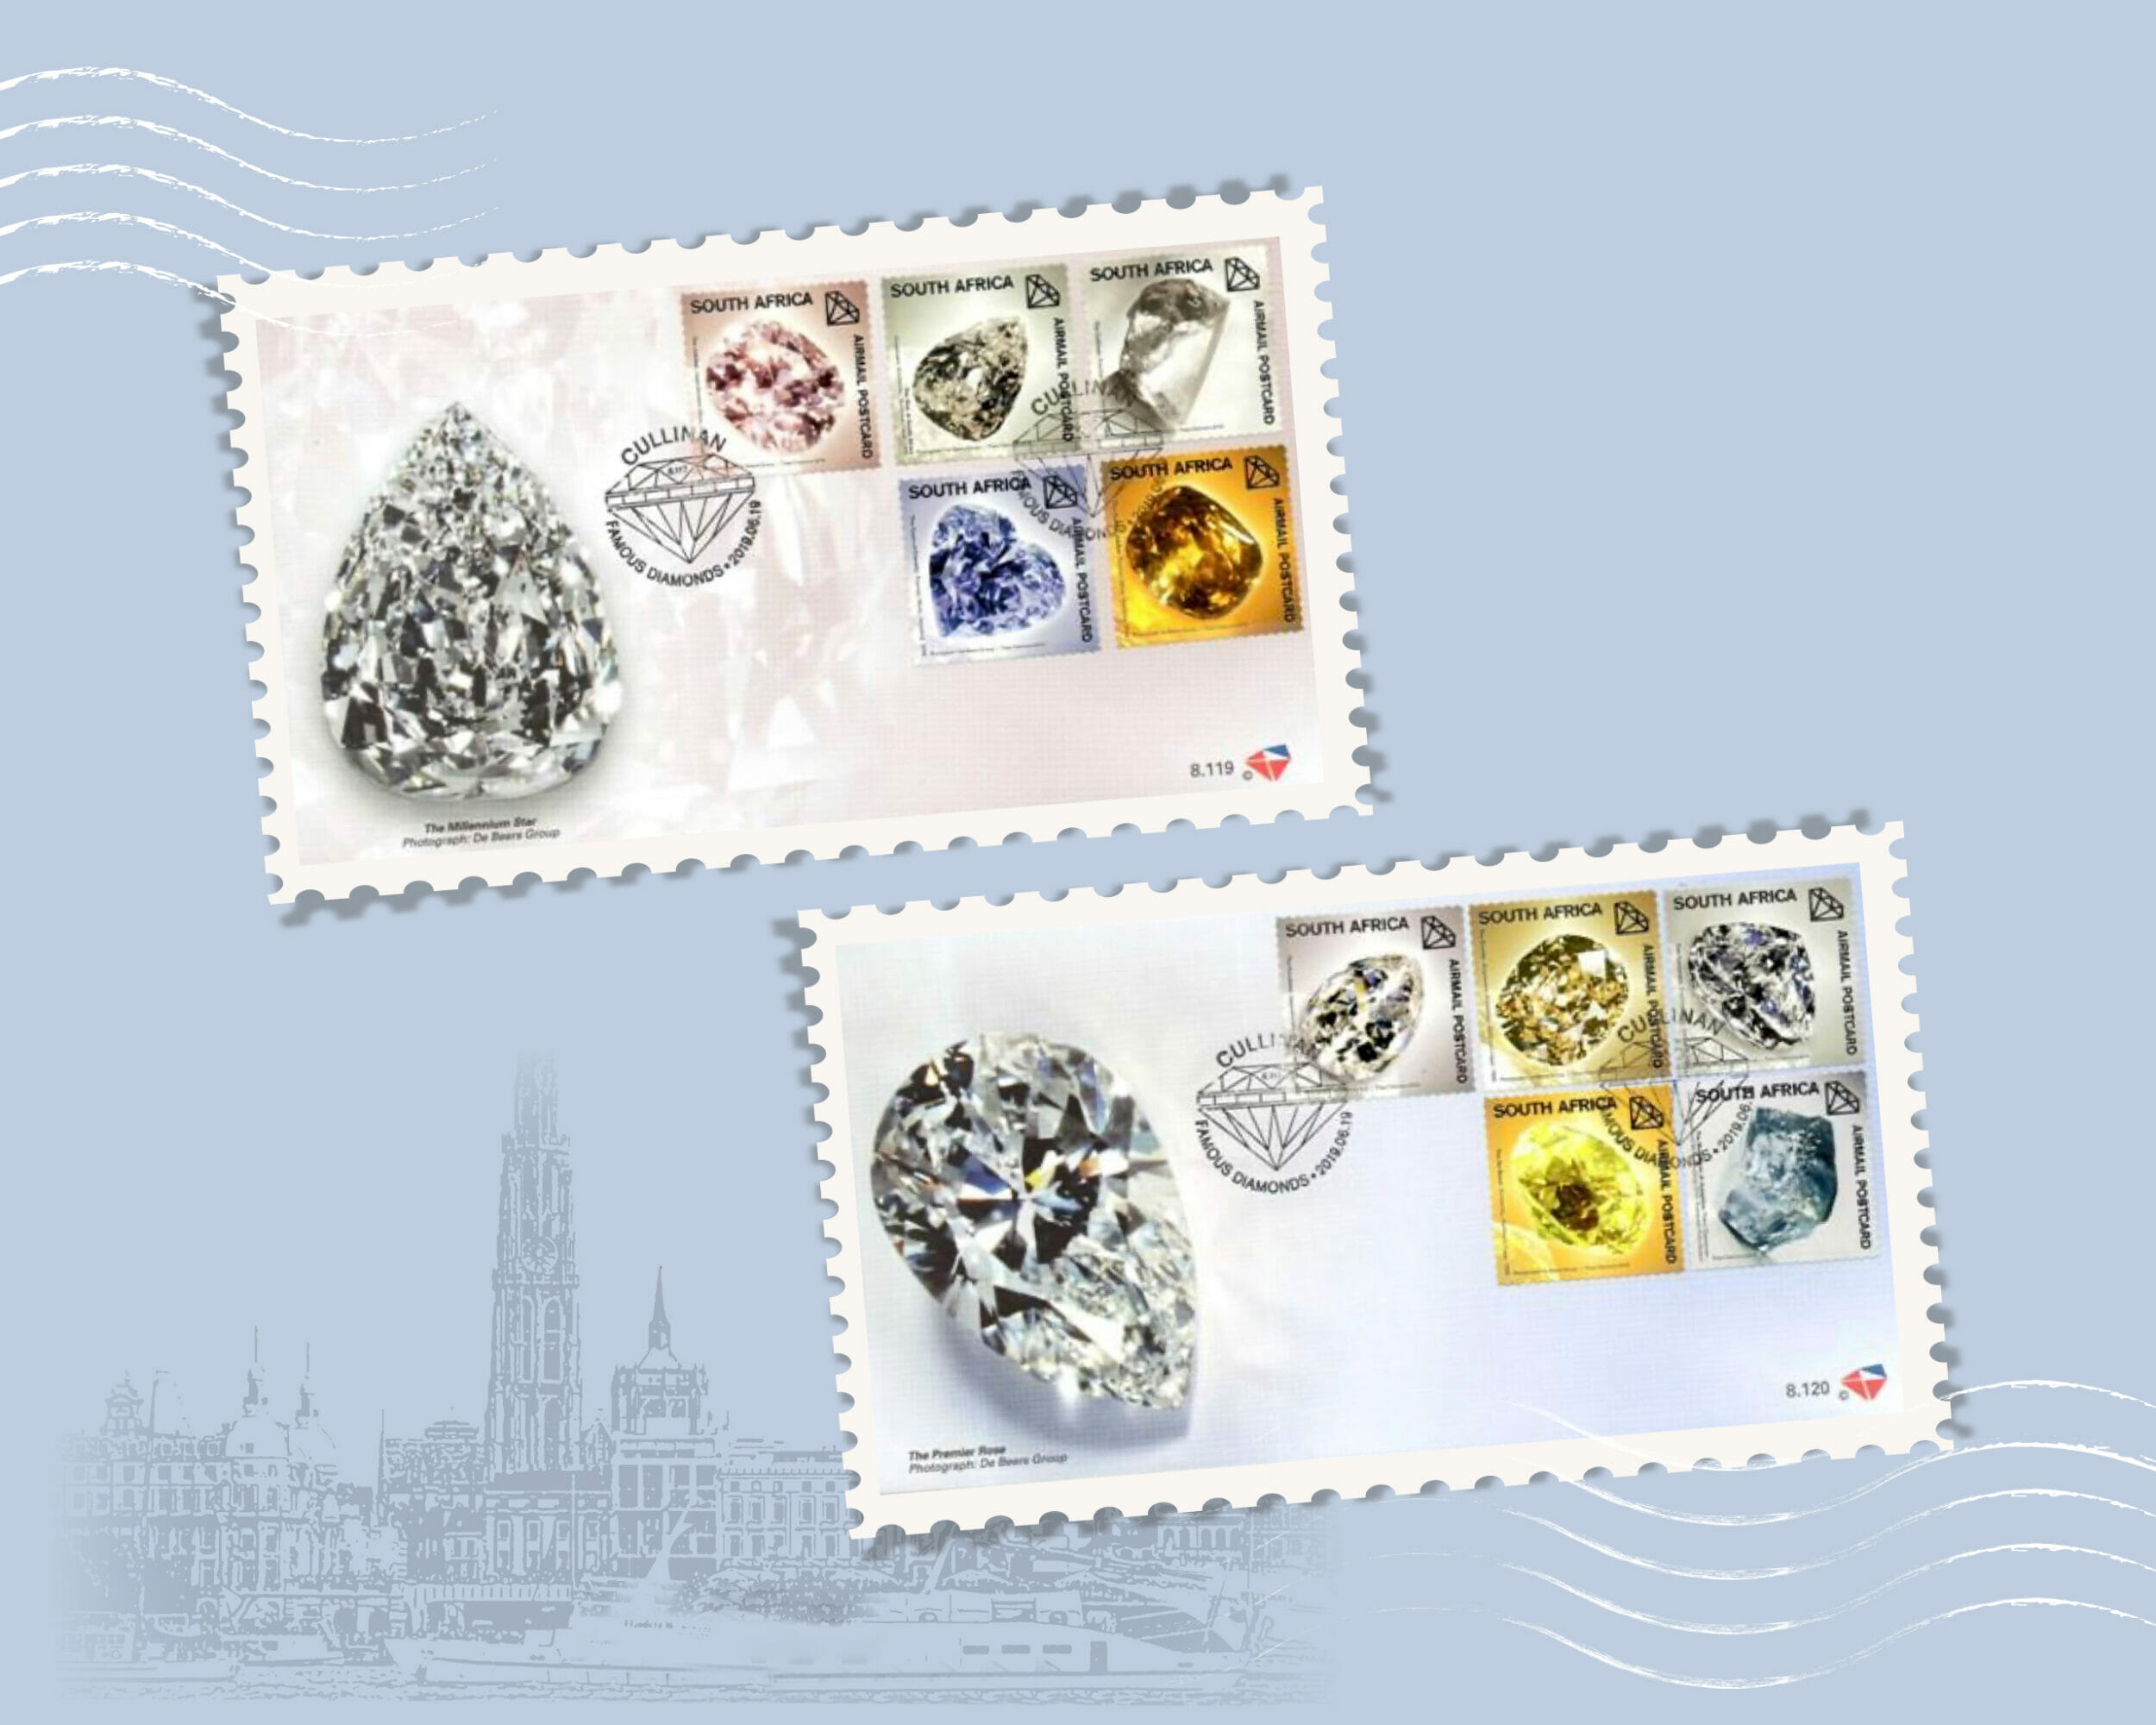 Famous Diamonds on world postage stamps.